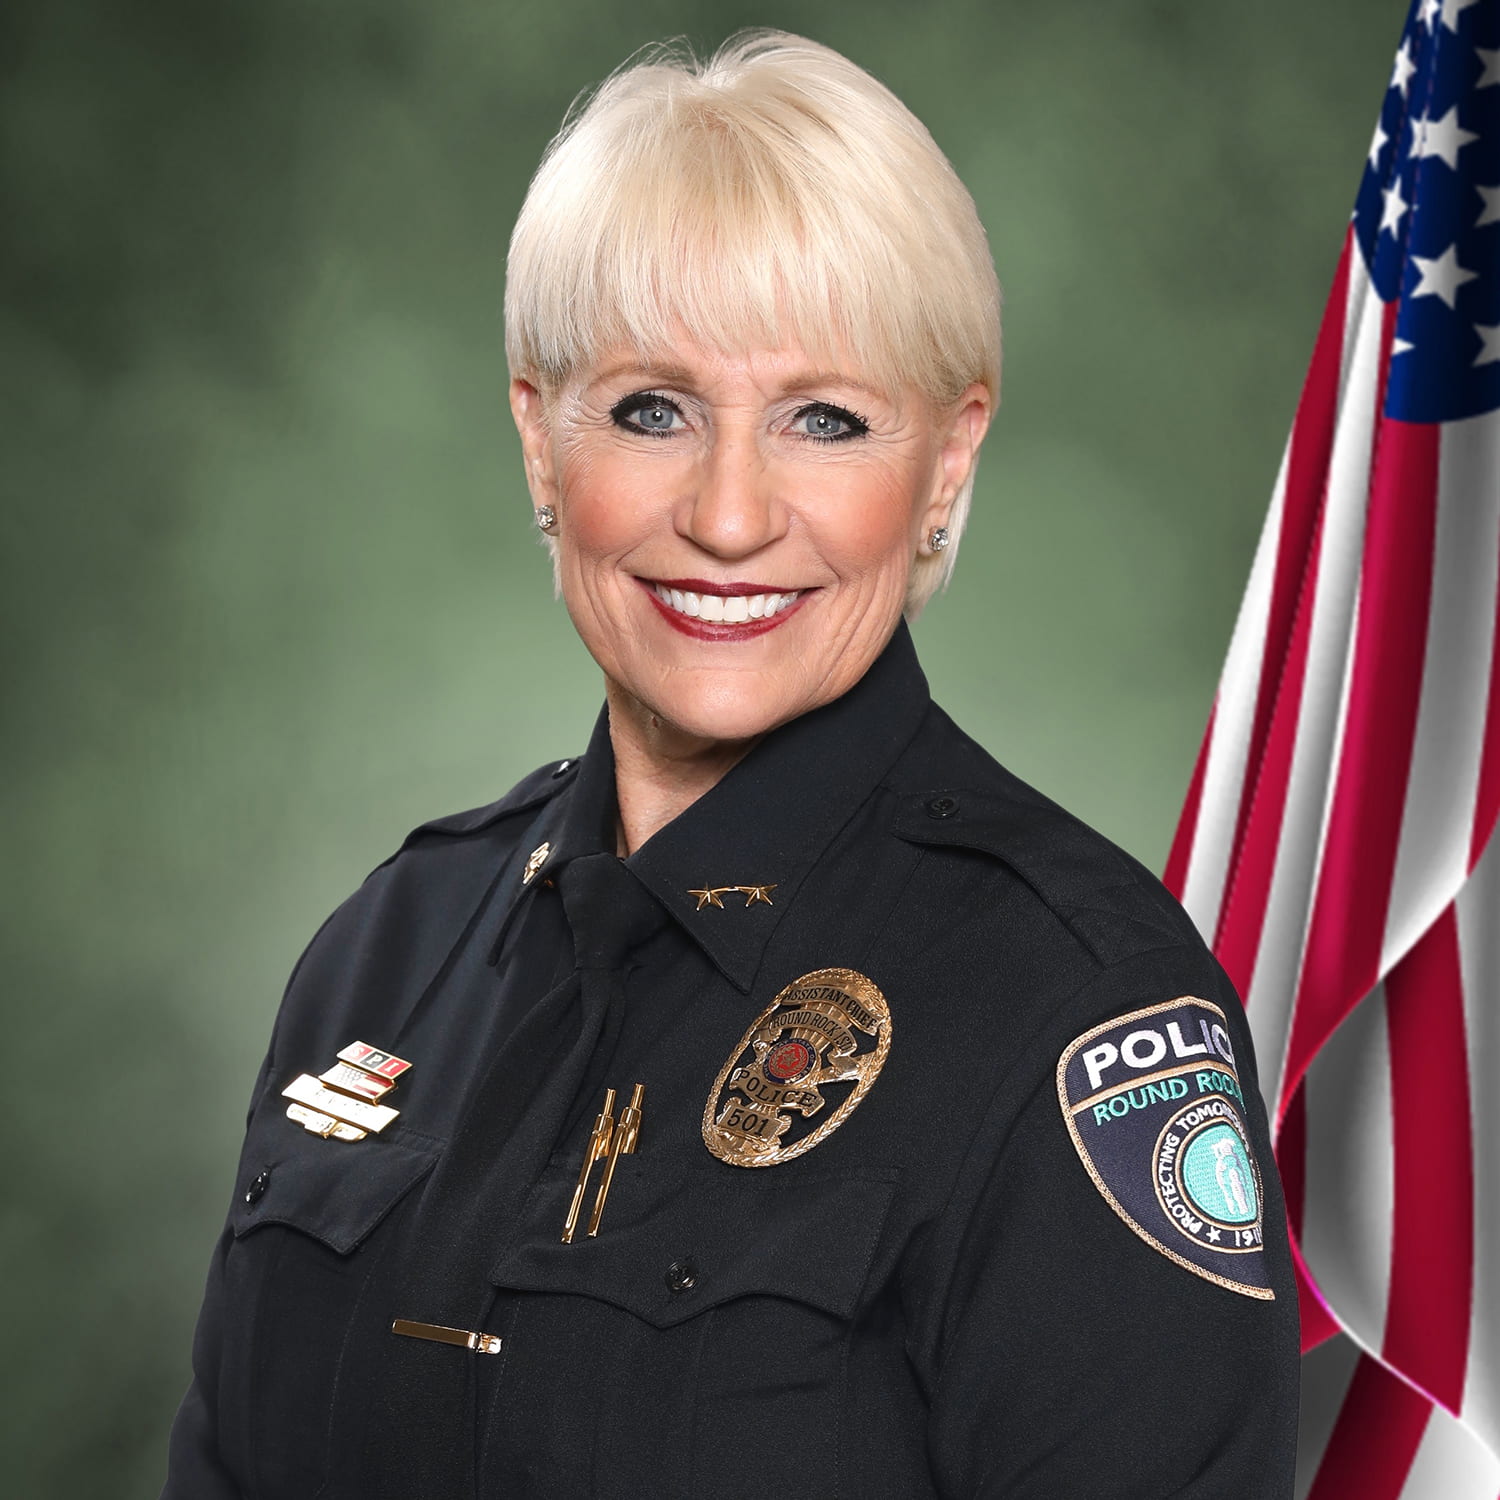 Assistant Chief Rose White	